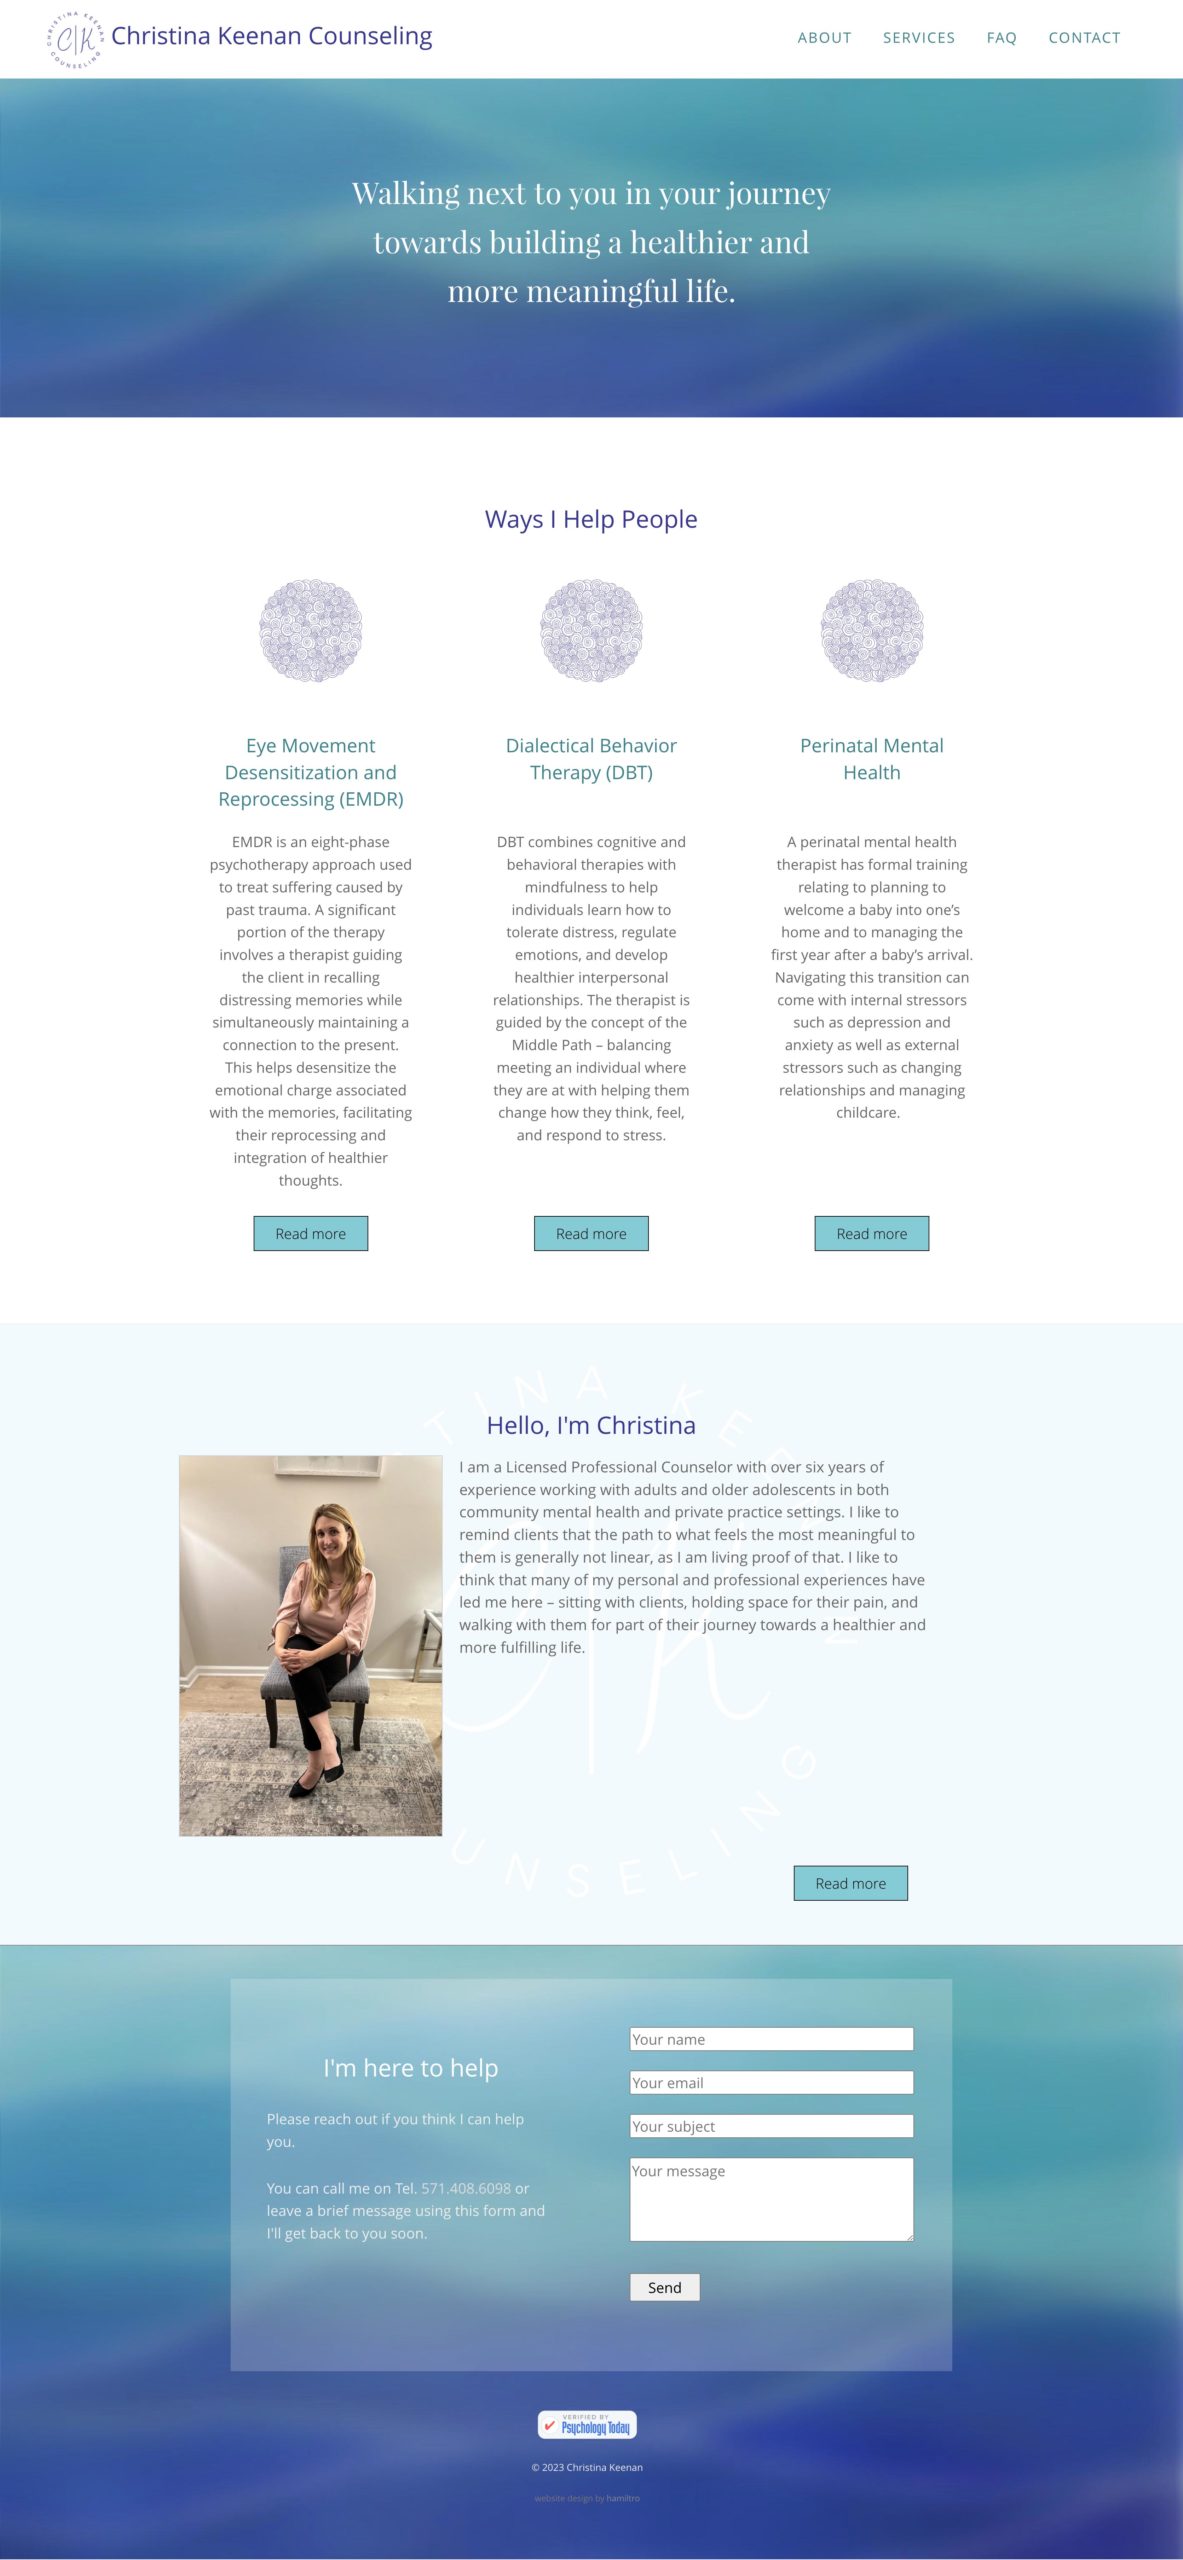 Website design for a counselor in Virginia. The long-scrolling homepage features a hero statement in the banner area, a section introducing the three services offered, a short biography of the counselor, and a contact form in the footer.